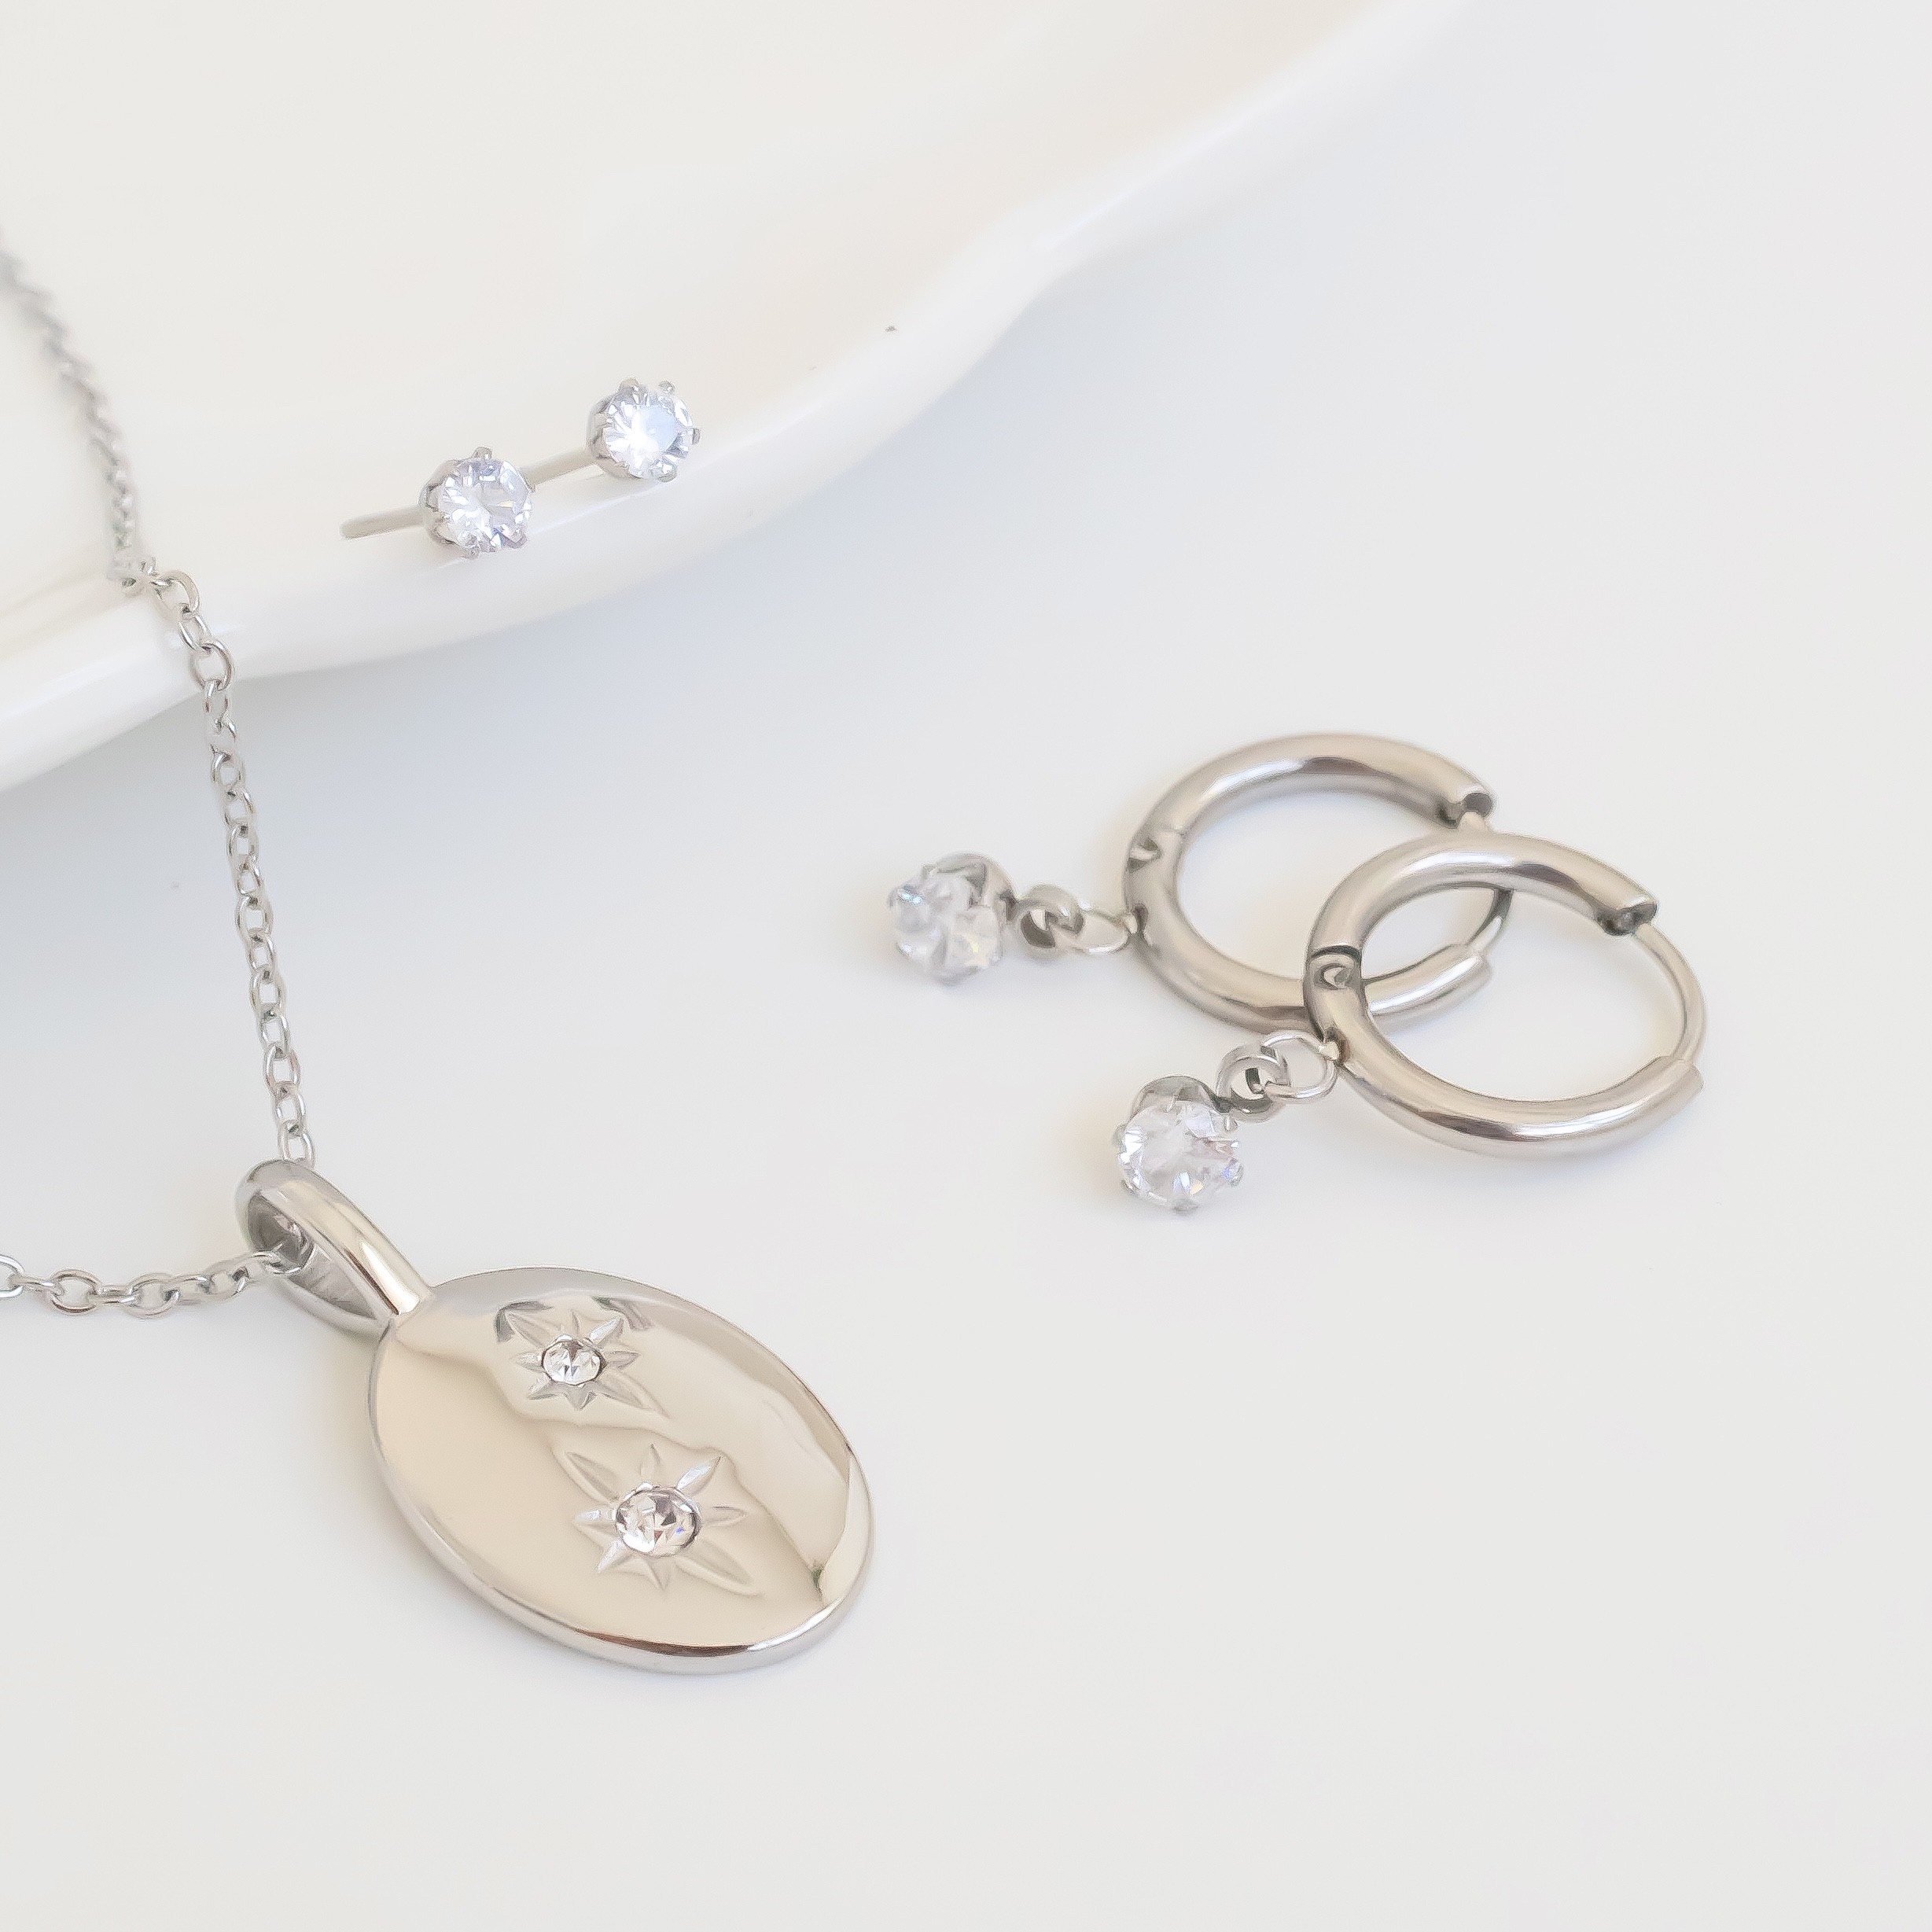 Gift set of silver jewellery